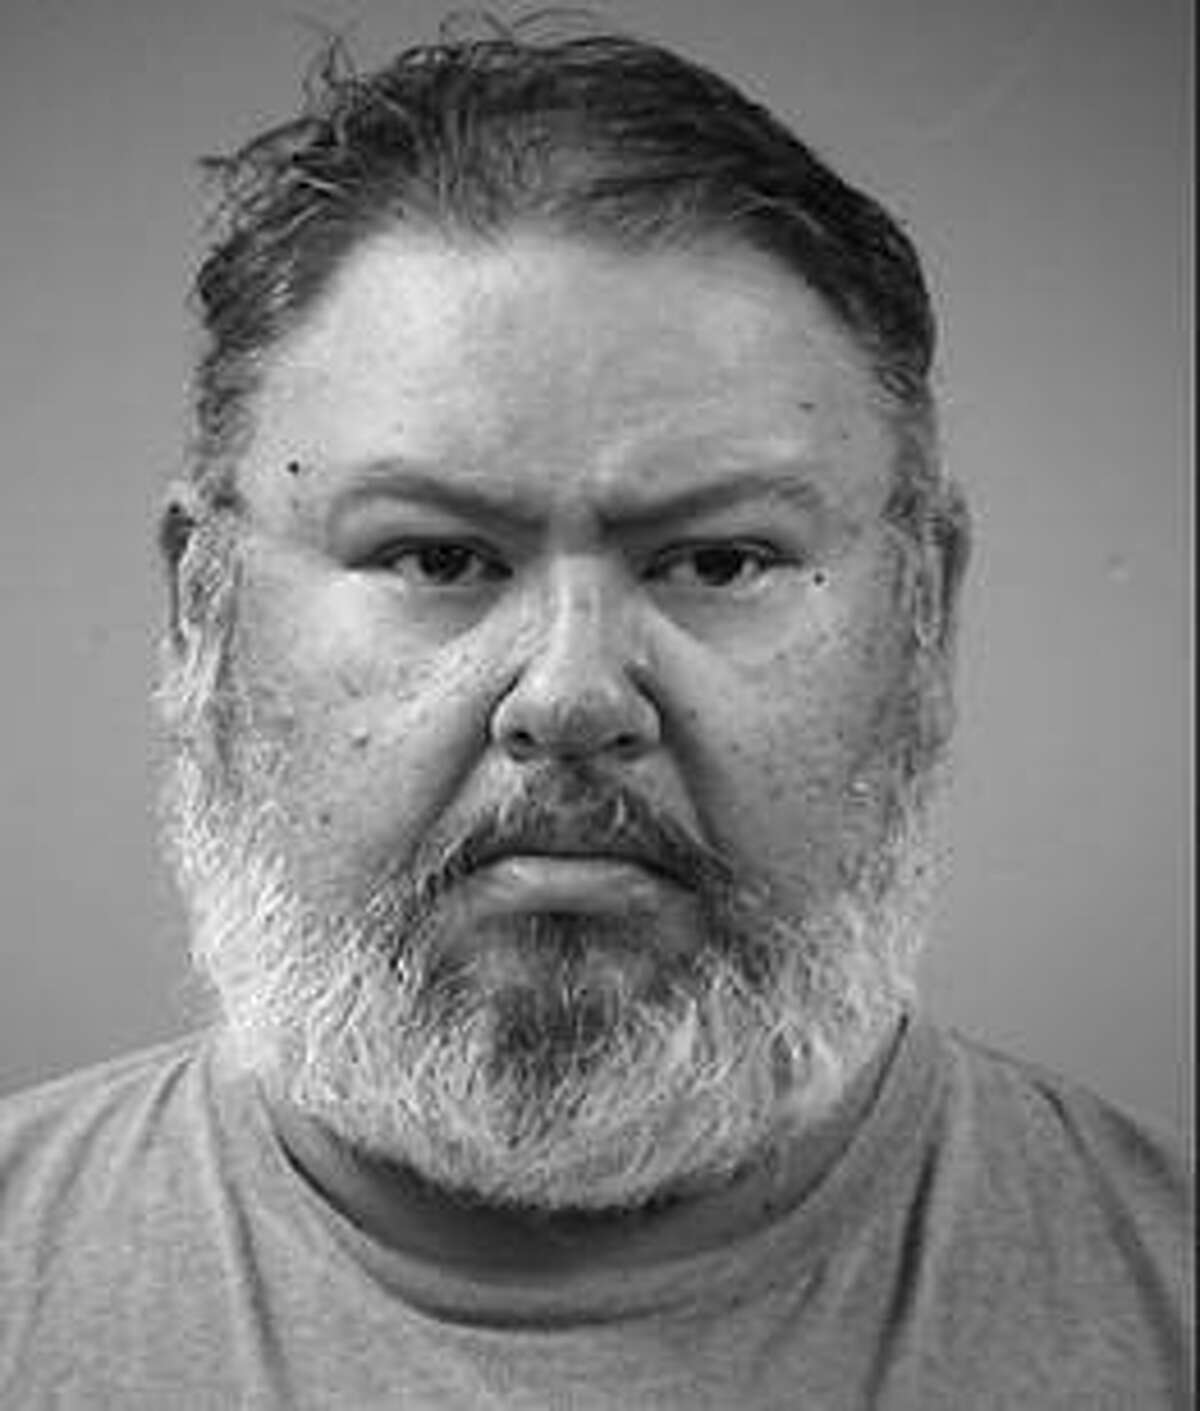 Jaime Santos, 44, was charged with 19 counts of possession of child pornography, promotion of child pornography and invasive visual recordings on Sept. 8, 2017.